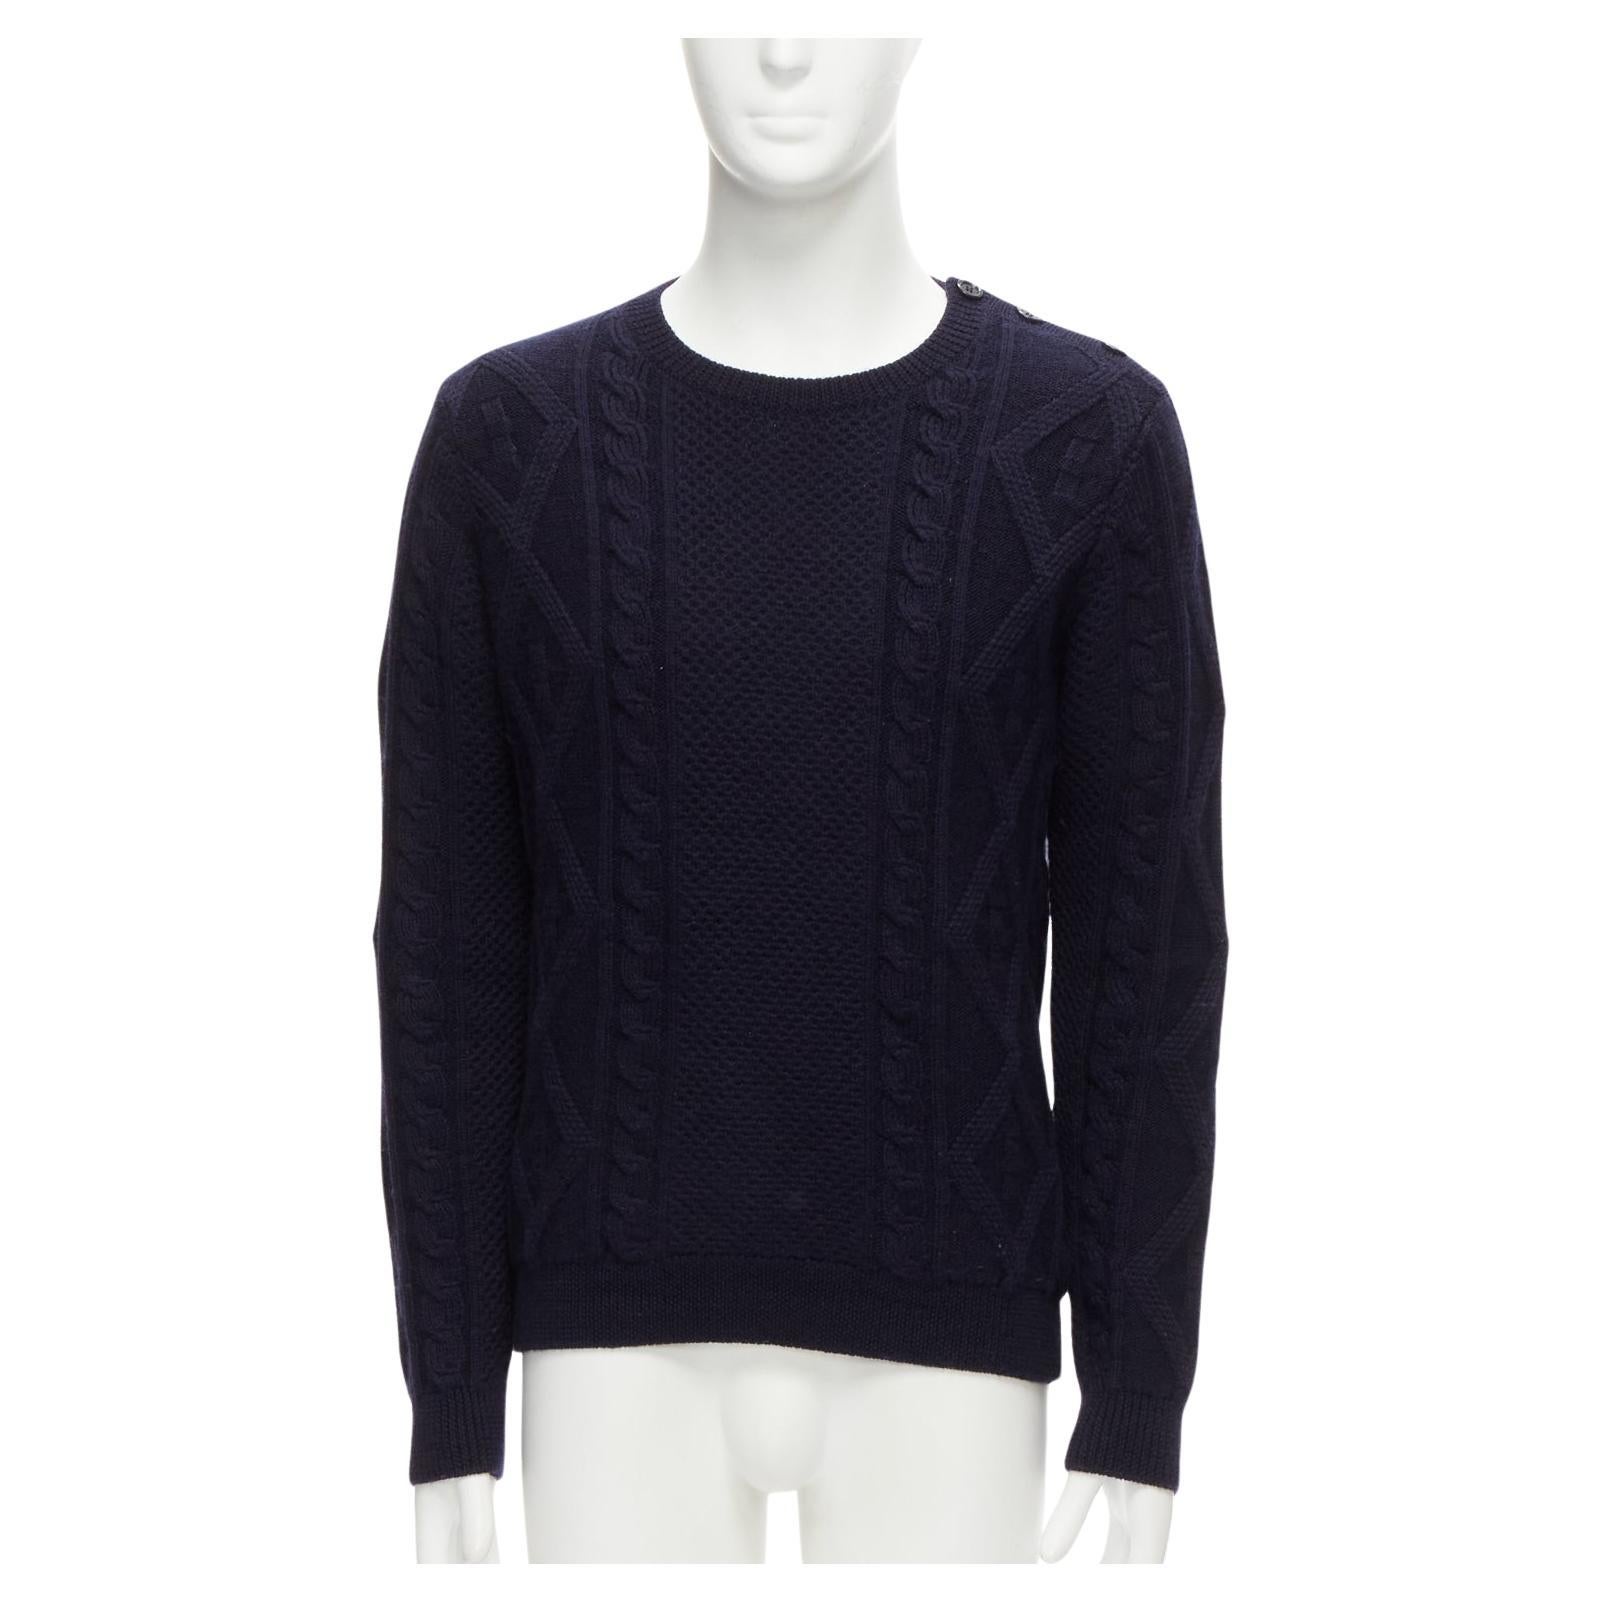 APC 100% wool navy blue fisherman cable knit crew neck long sleeve sweater S For Sale